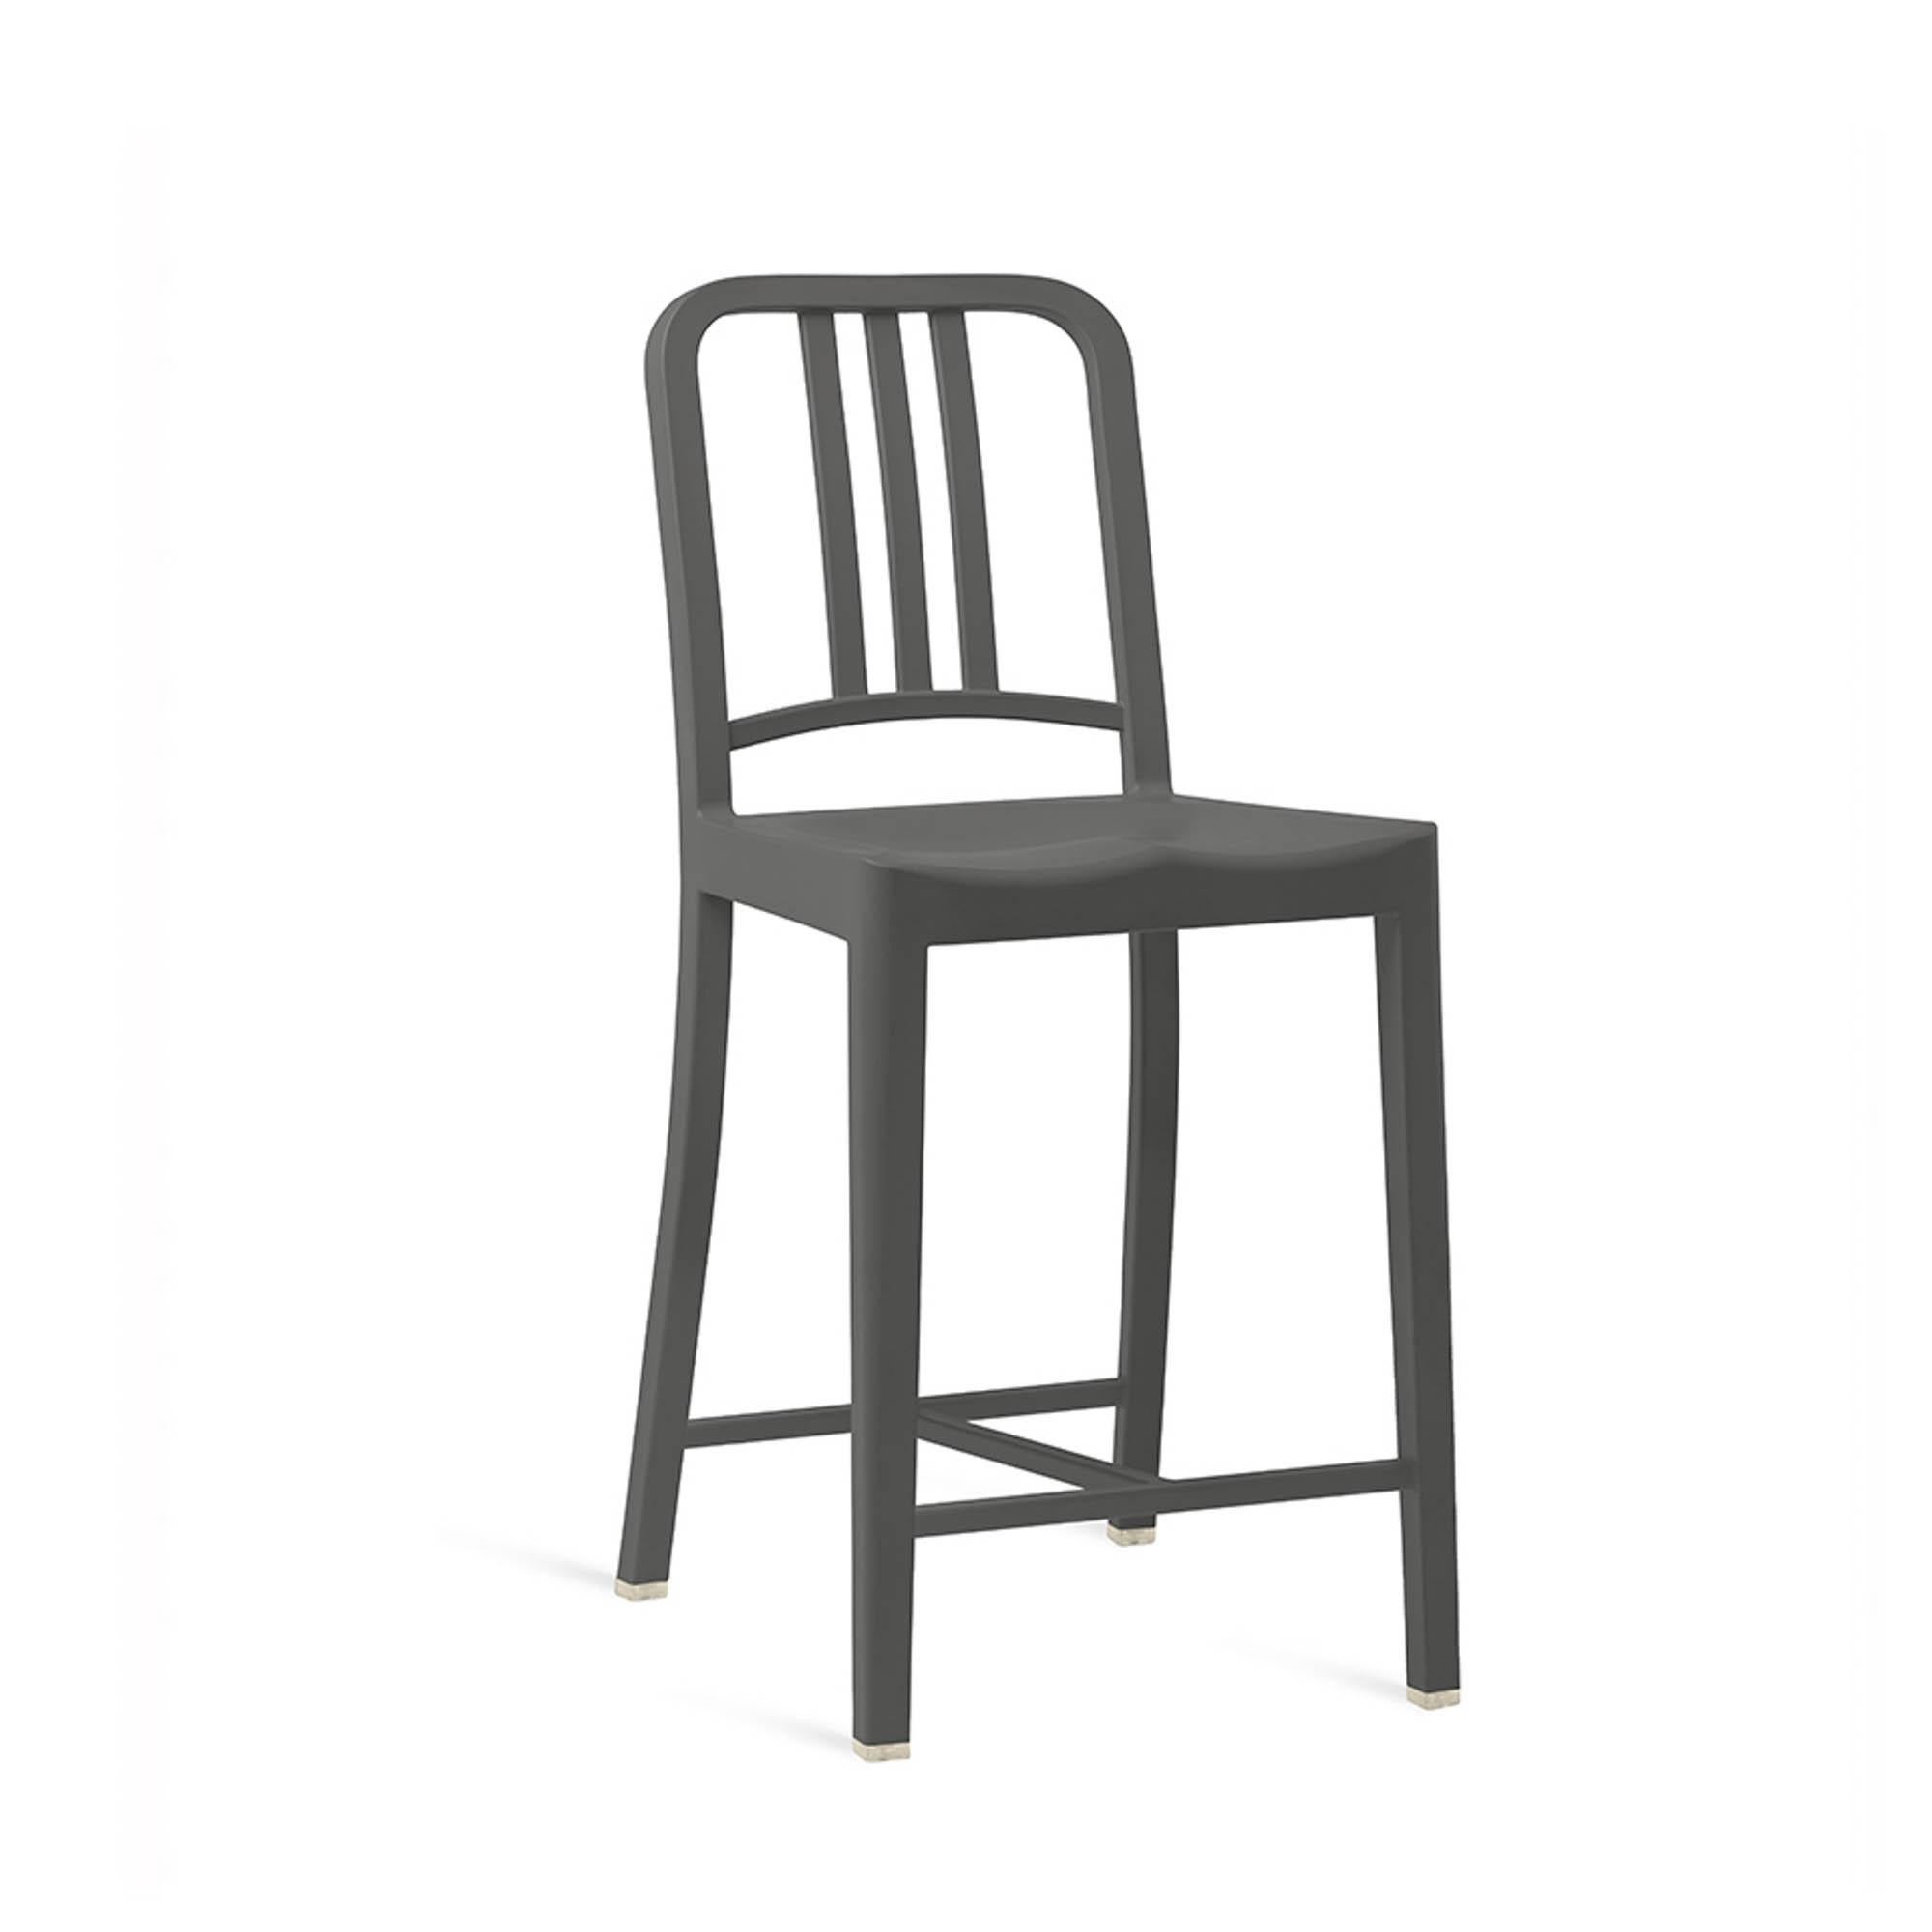 The 111 Navy Collection is a story of innovation, turning waste plastic into something people will keep. Each stool is made of 150 recycled PET bottles. Like the original 111 Navy chair, these one-piece stools are an engineering success - made to